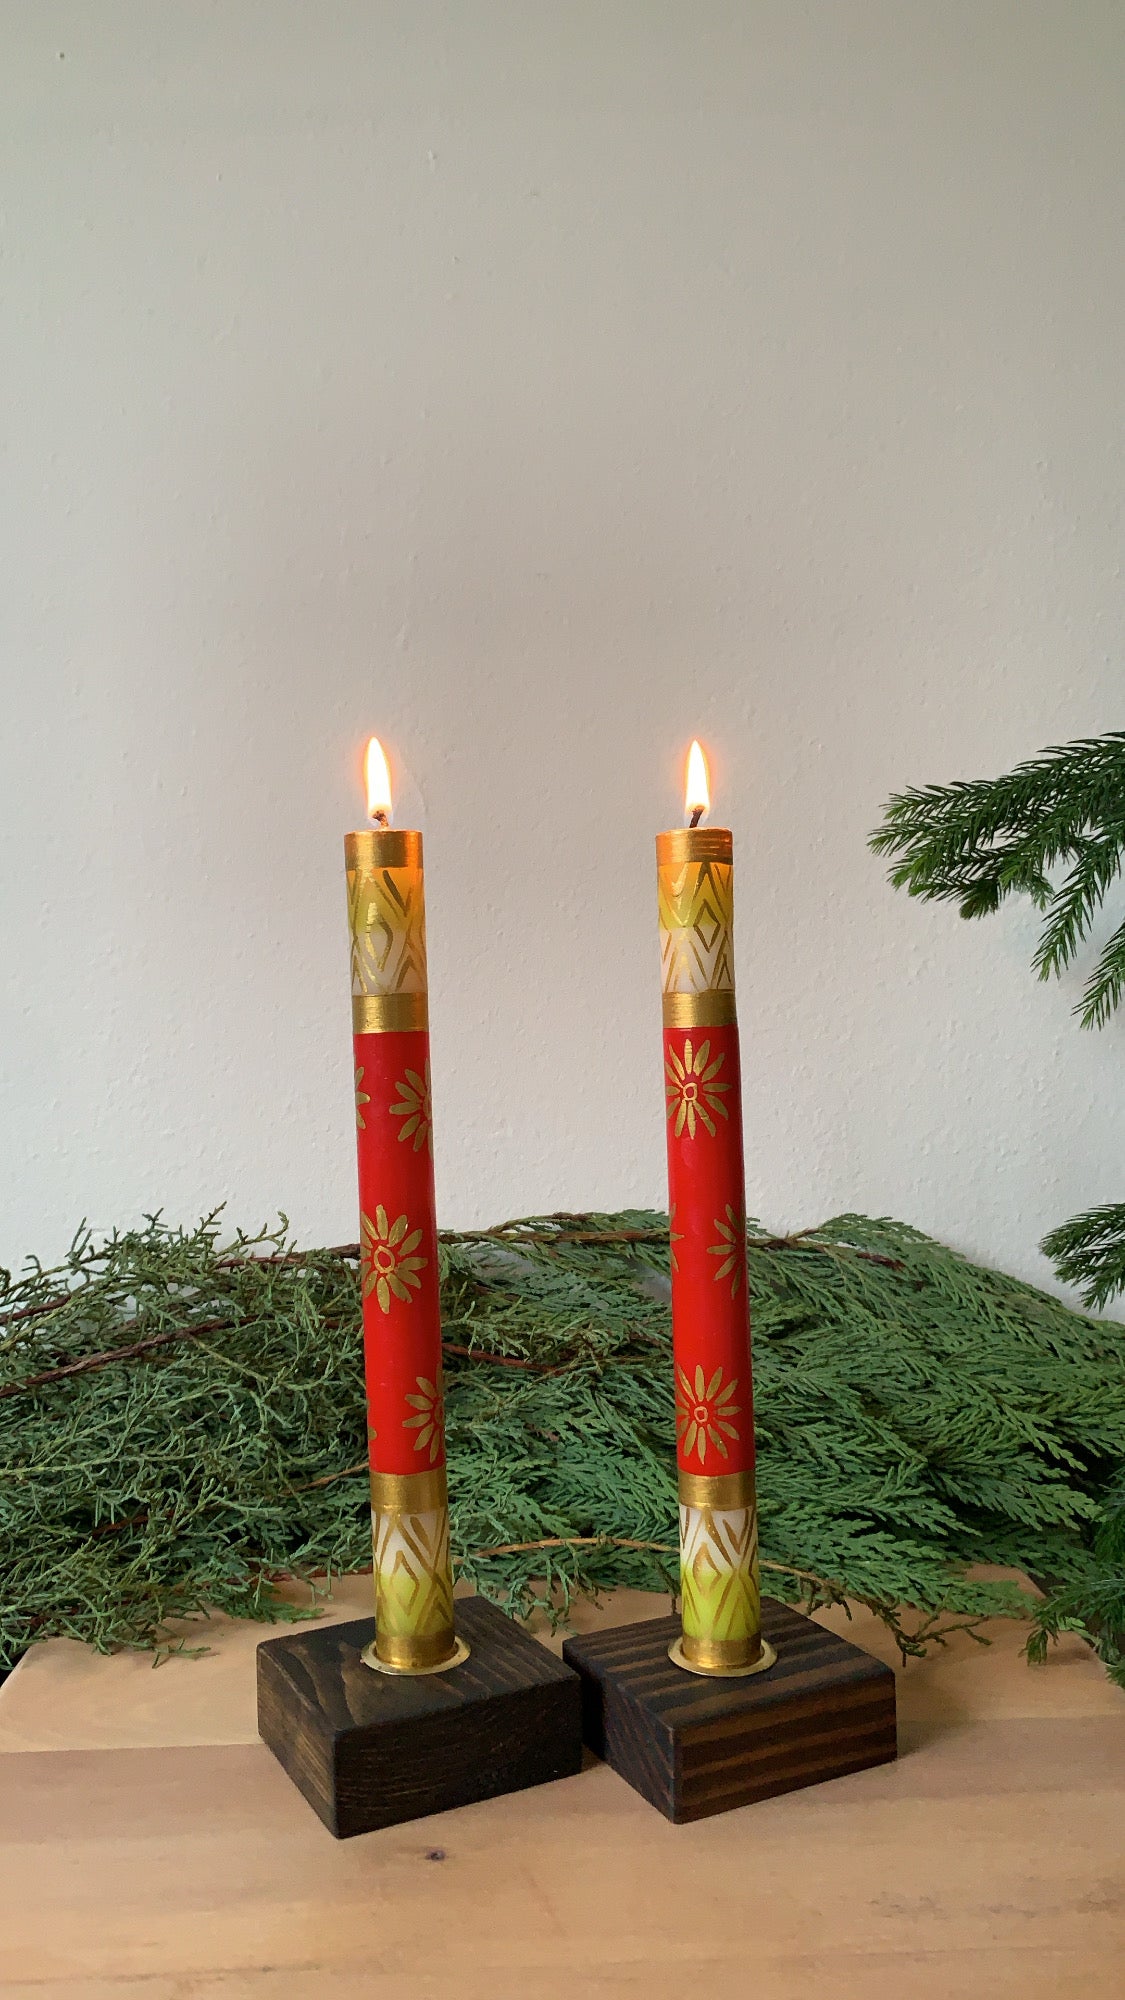 Christmas hand made and hand painted taper candle pair in dark brown taper candle holders. The taper candles are lite and are hand painted  red with gold designs. Fair Trade candles.